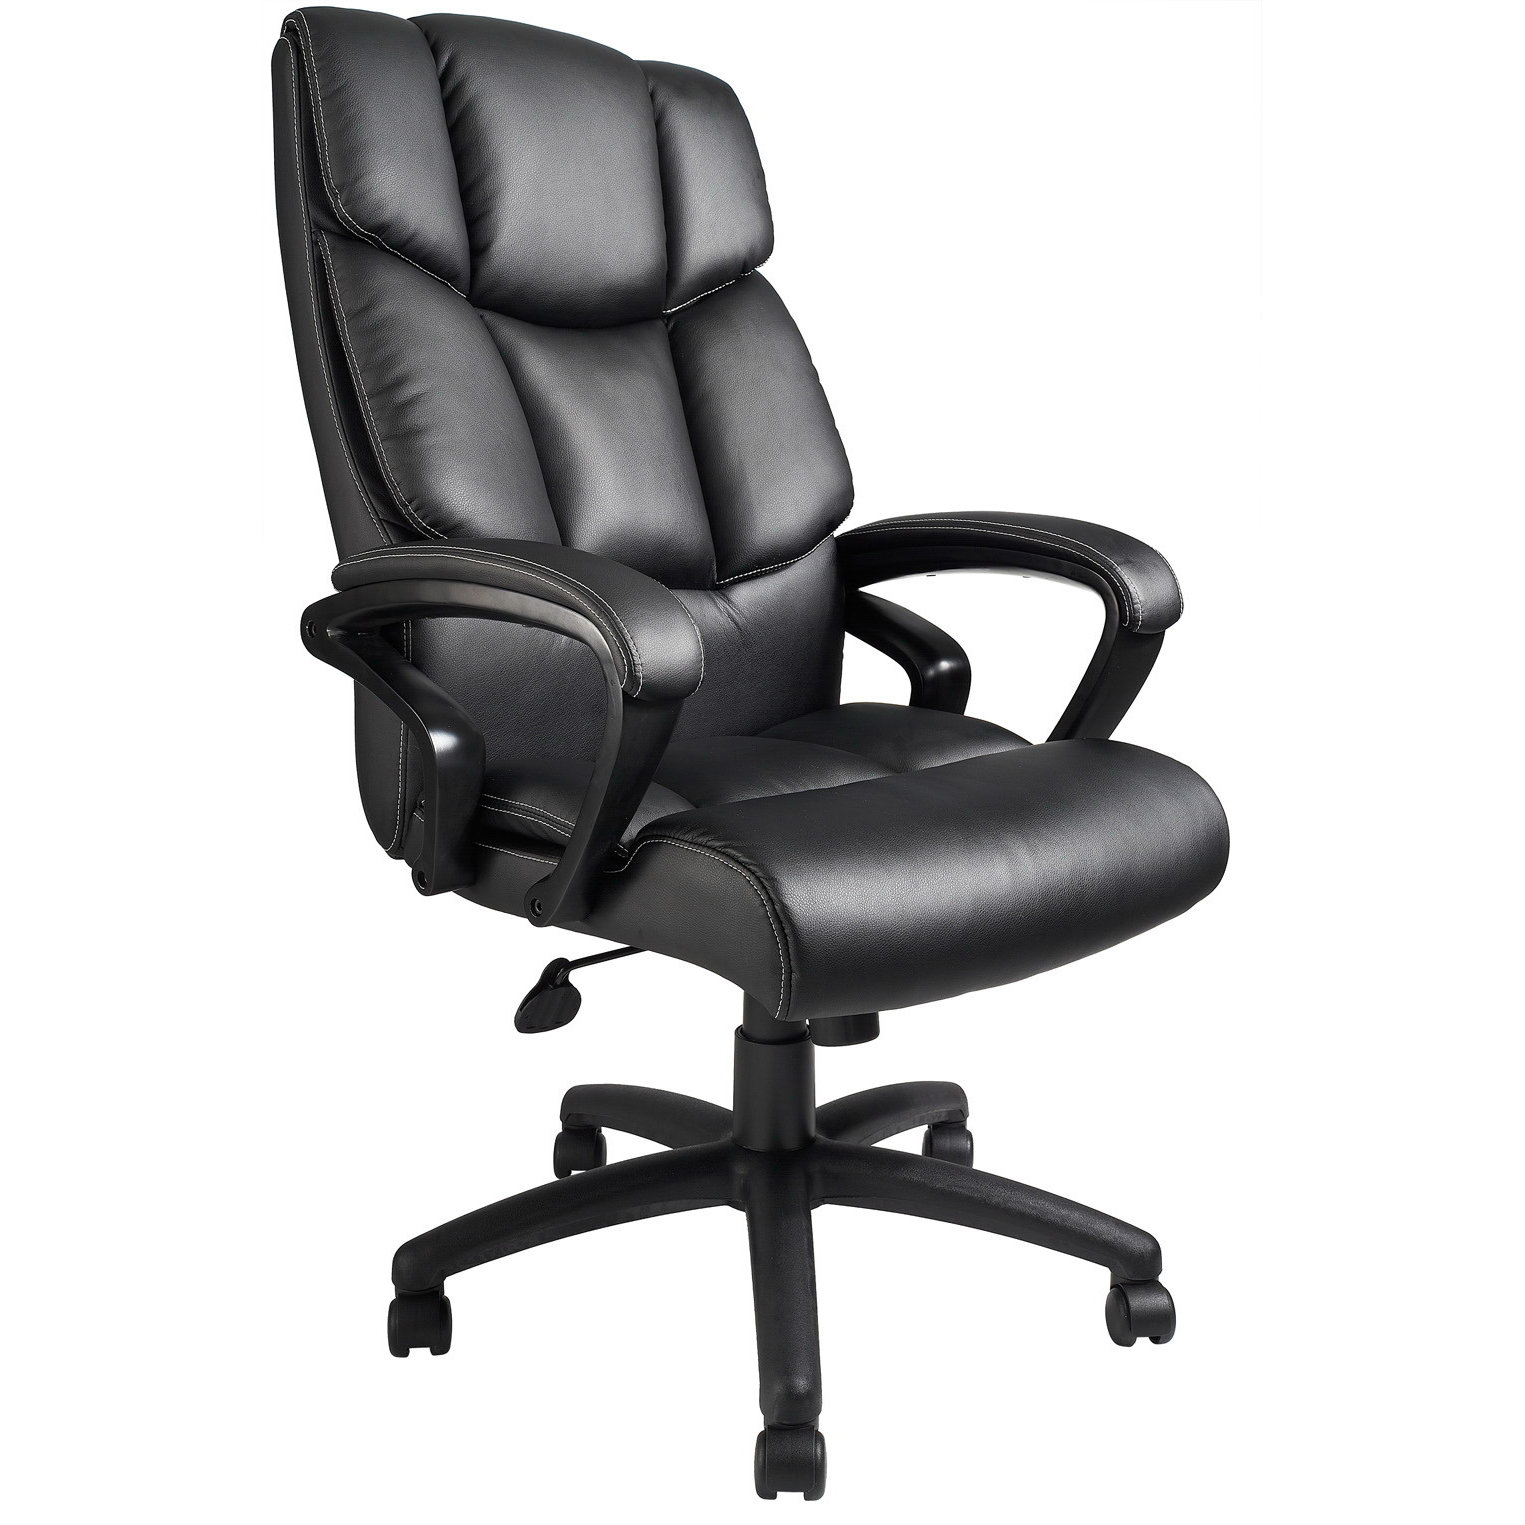 Boss Office Products Adjustable High-Back Leather Executive Chair